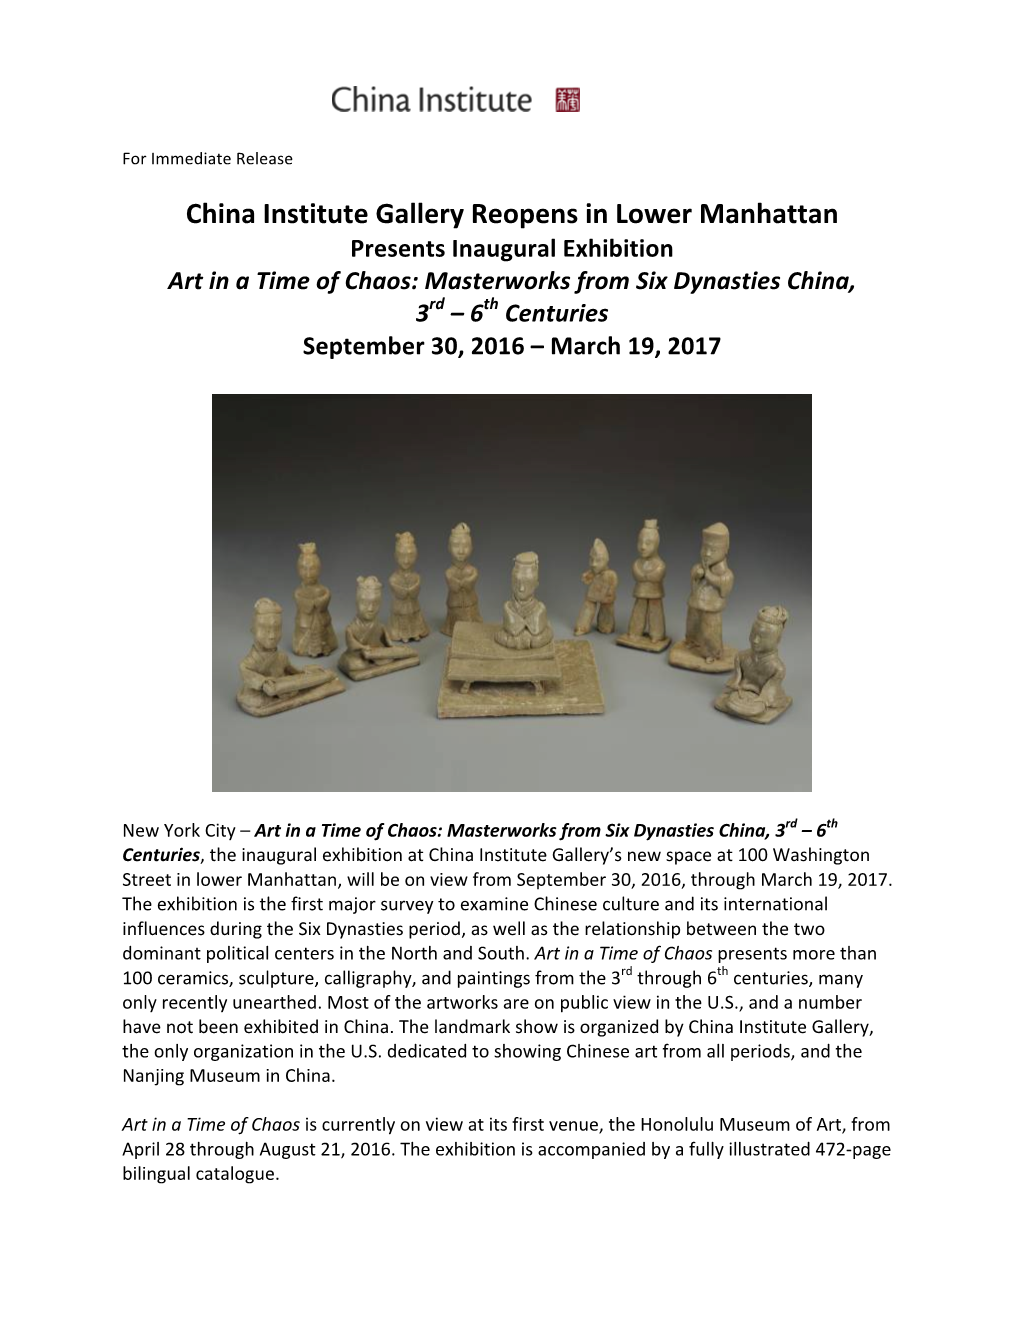 China Institute Gallery Reopens in Lower Manhattan